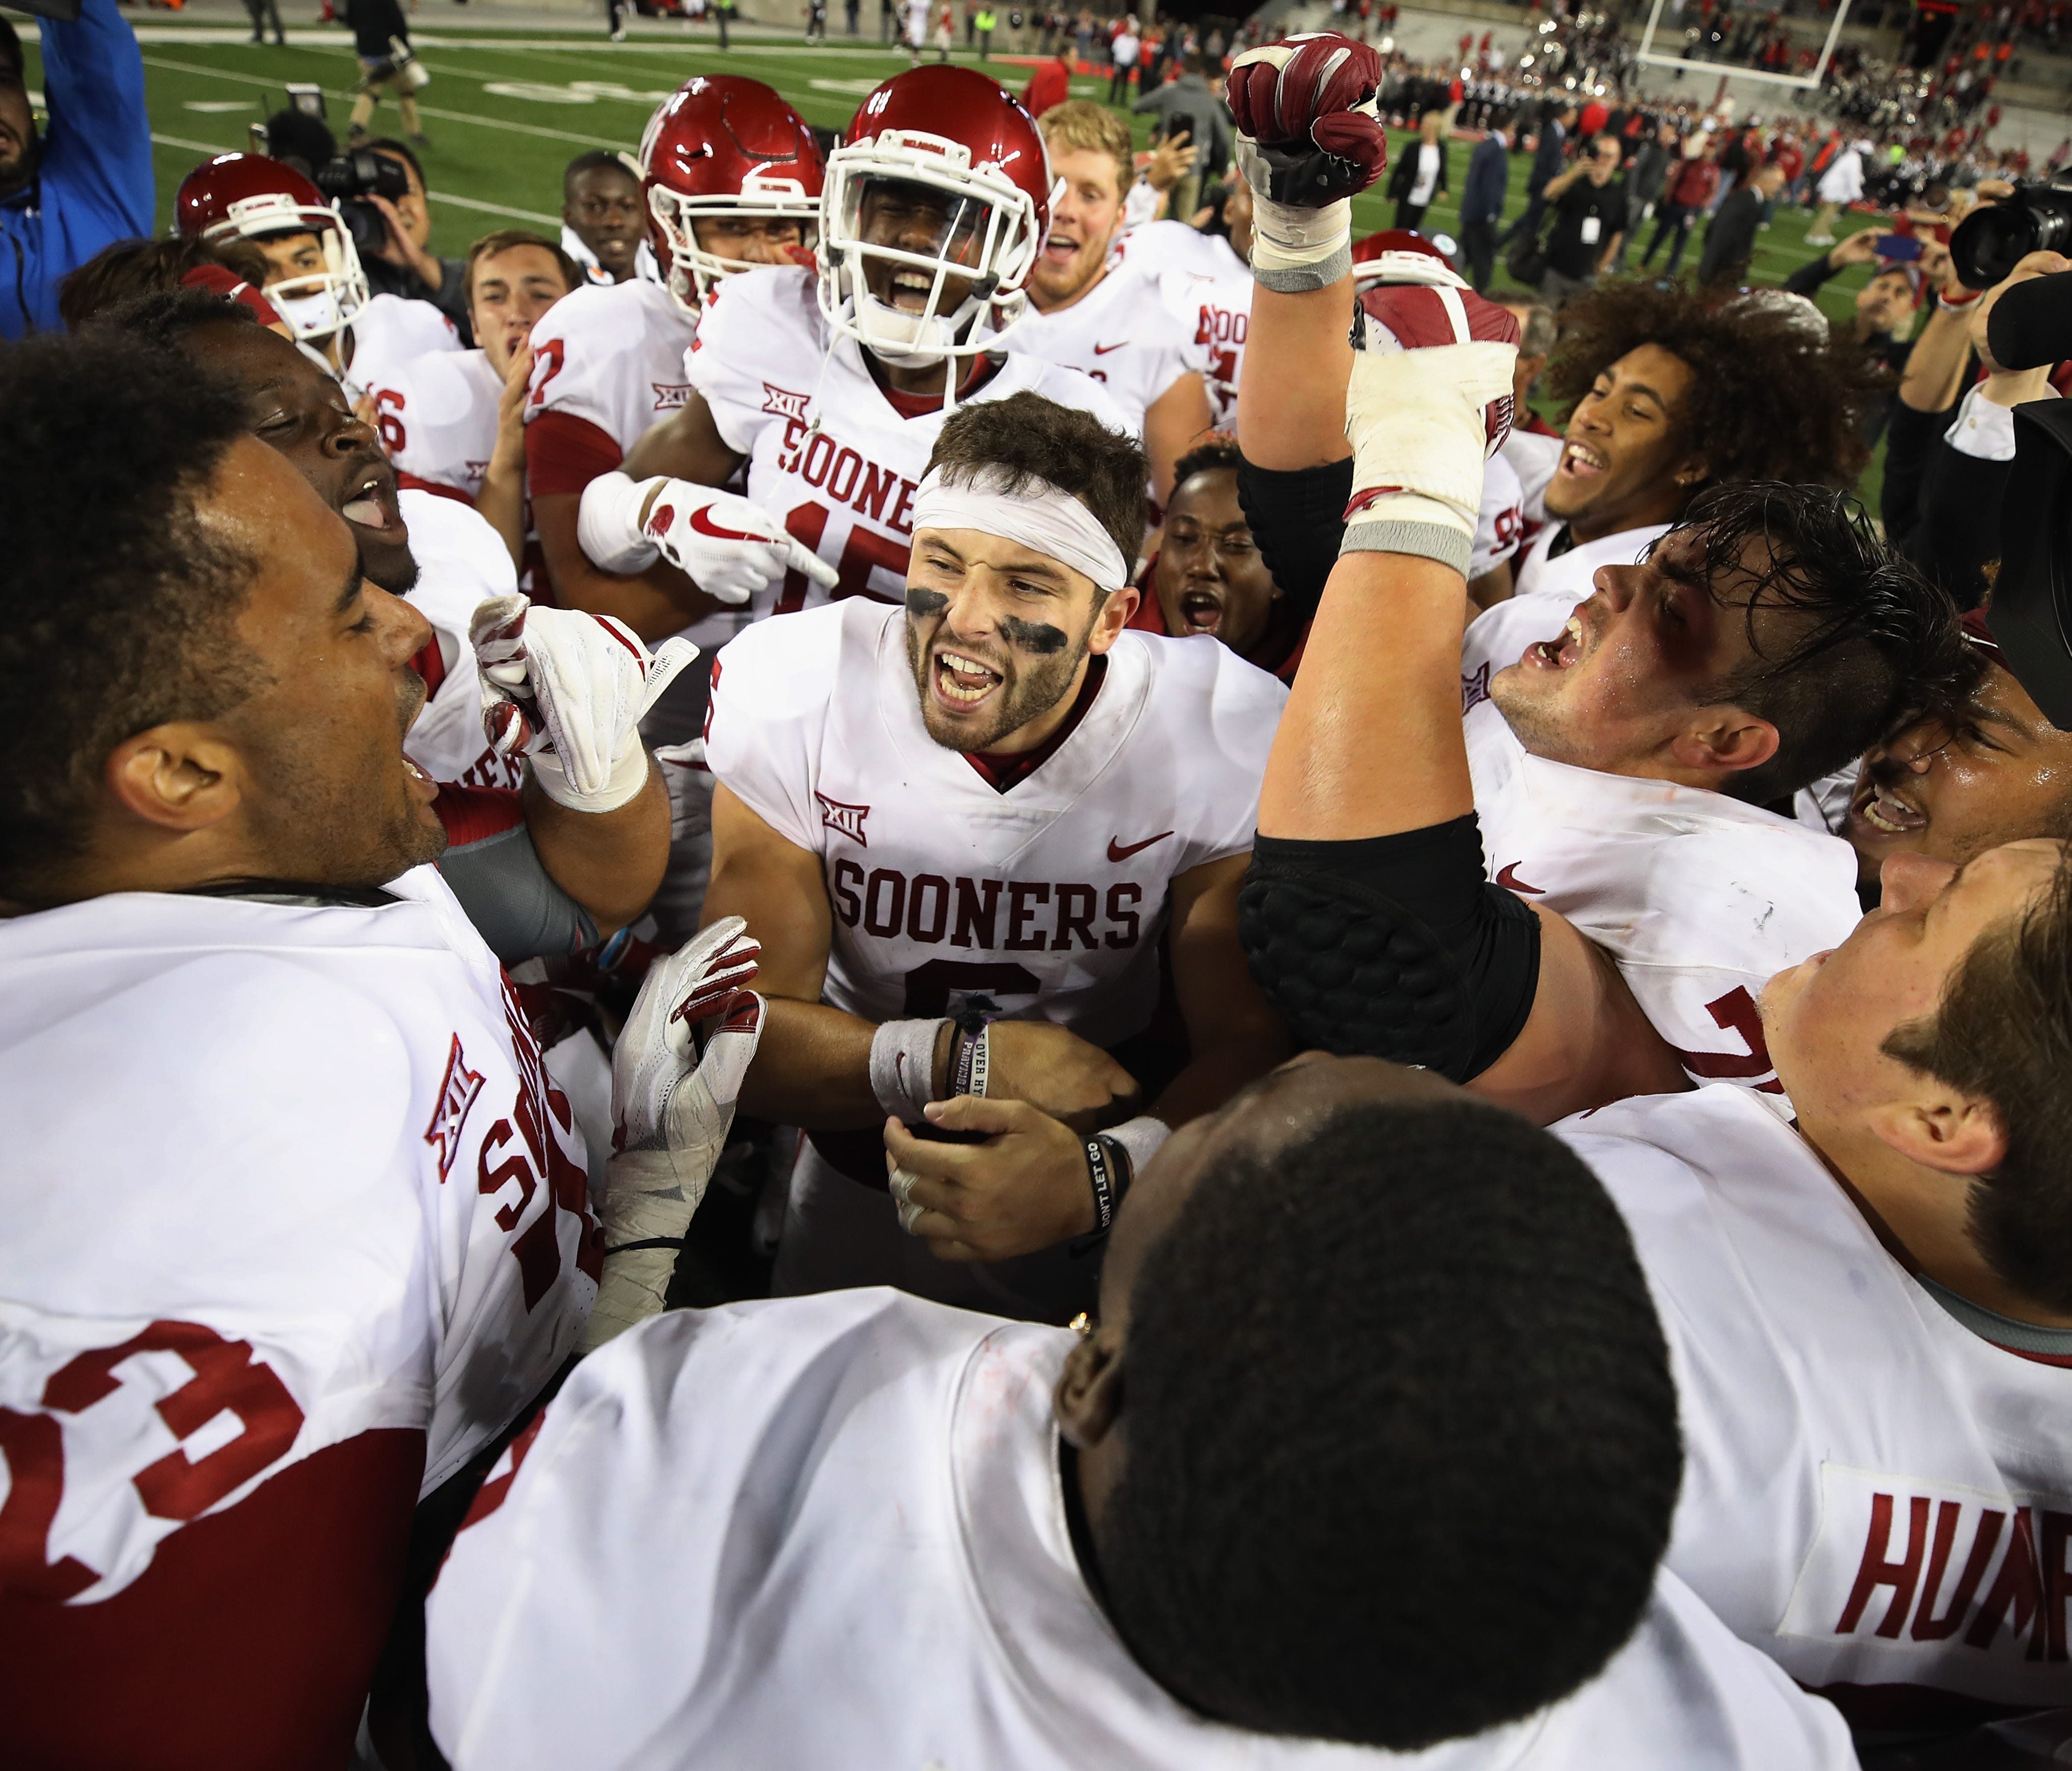 Oklahoma quarterback Baker Mayfield celebrates with teammates after their defeat of Ohio State in Ohio Stadium.